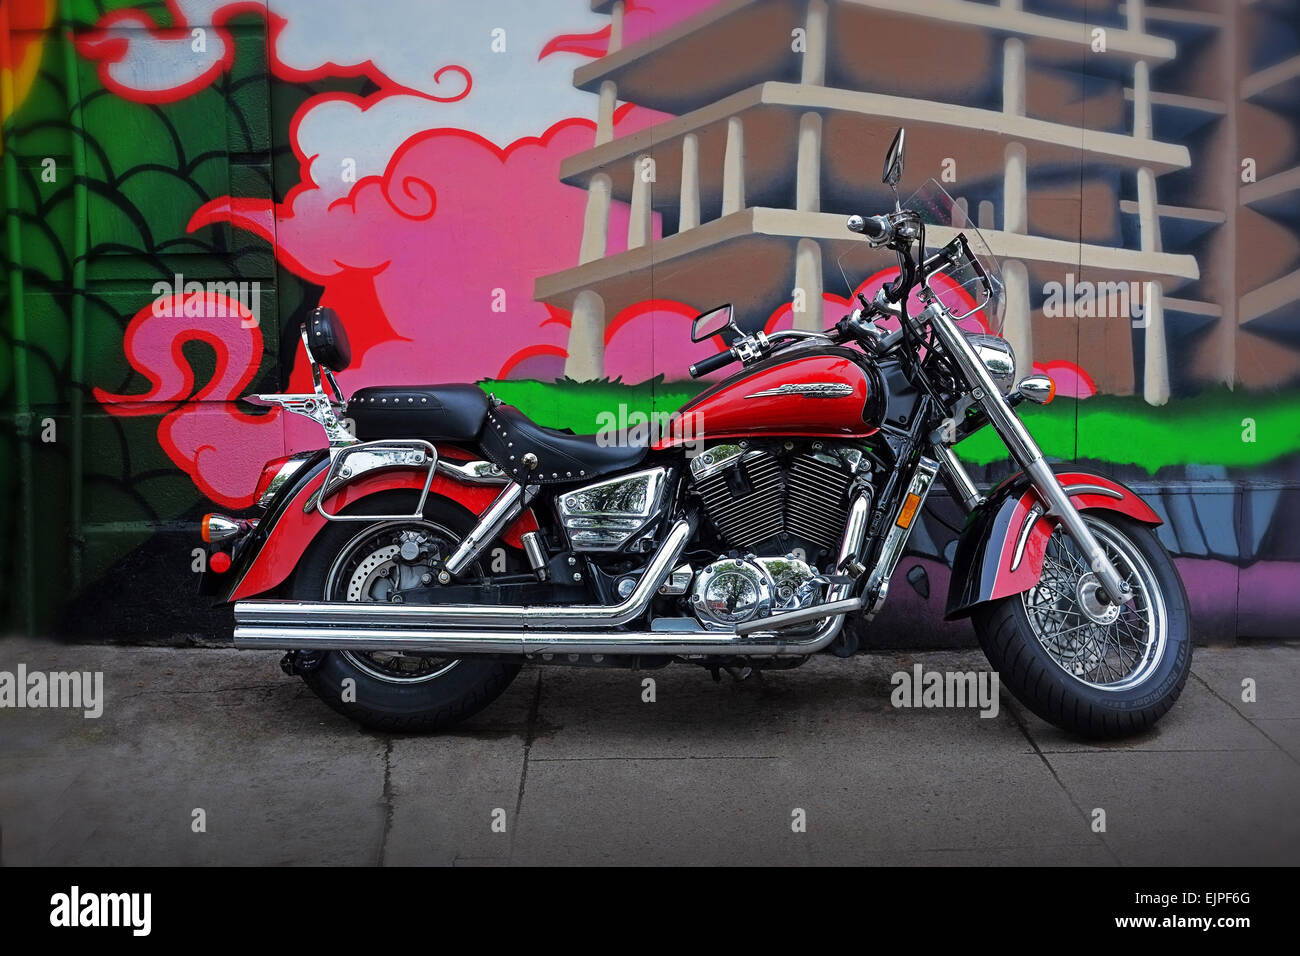 Honda Shadow Aero 11000 cruiser motorcycle parked in front of a graffiti covered wall in Dublin Ireland. Stock Photo